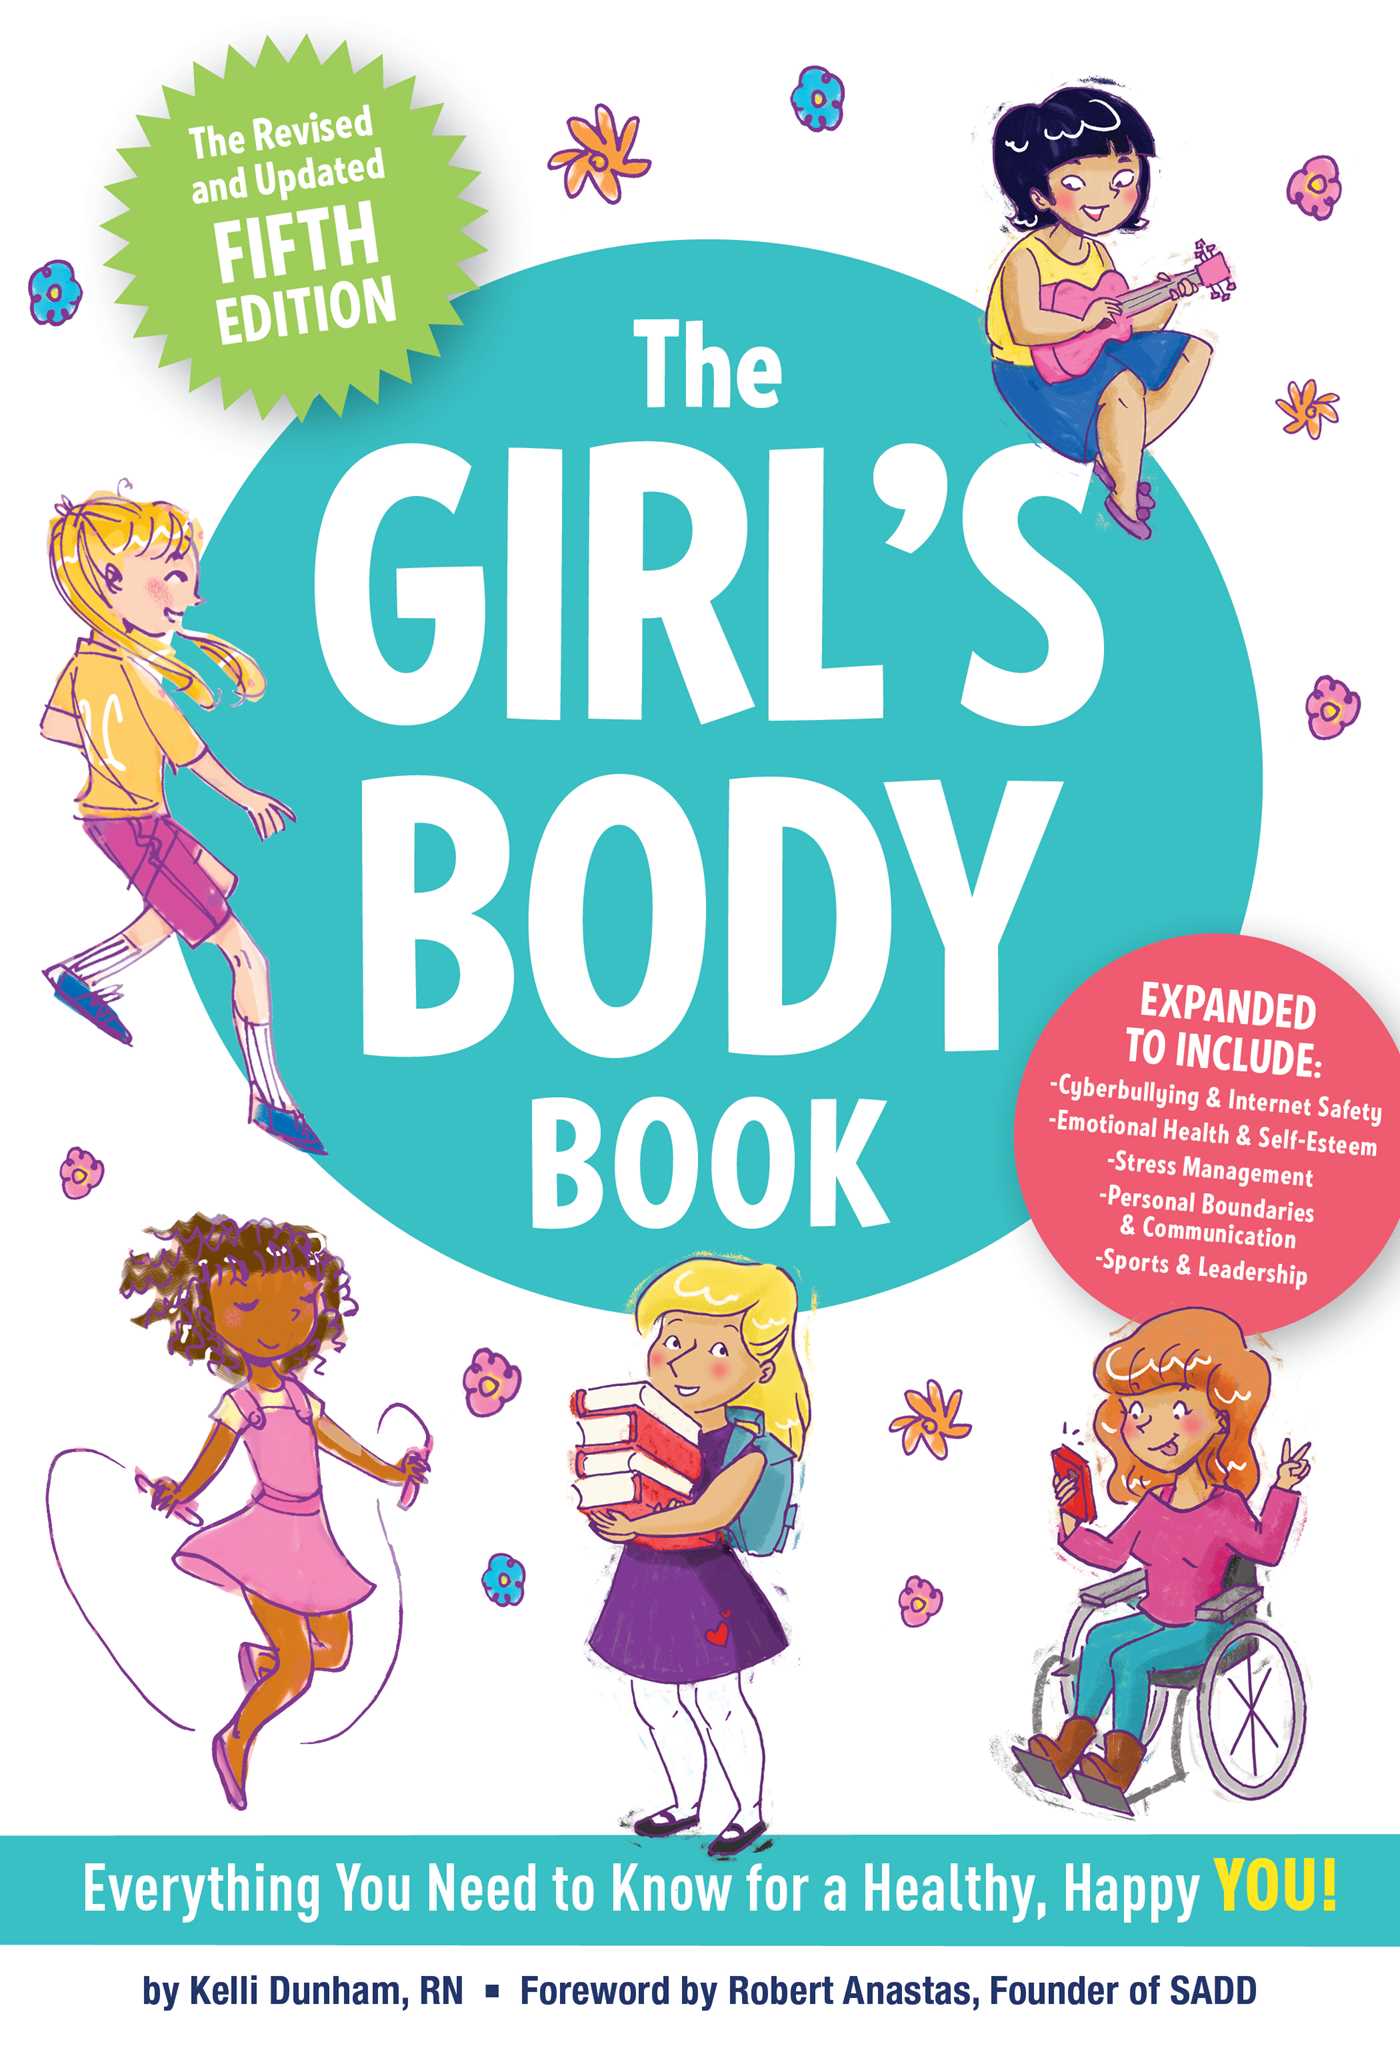 The Girls Body Book (Fifth Edition) : Everything Girls Need to Know for Growing Up! (Puberty Guide, Girl Body Changes, Health Education Book, Parenting Topics, Social Skills, Books for Growing Up) | Dunham, Kelli